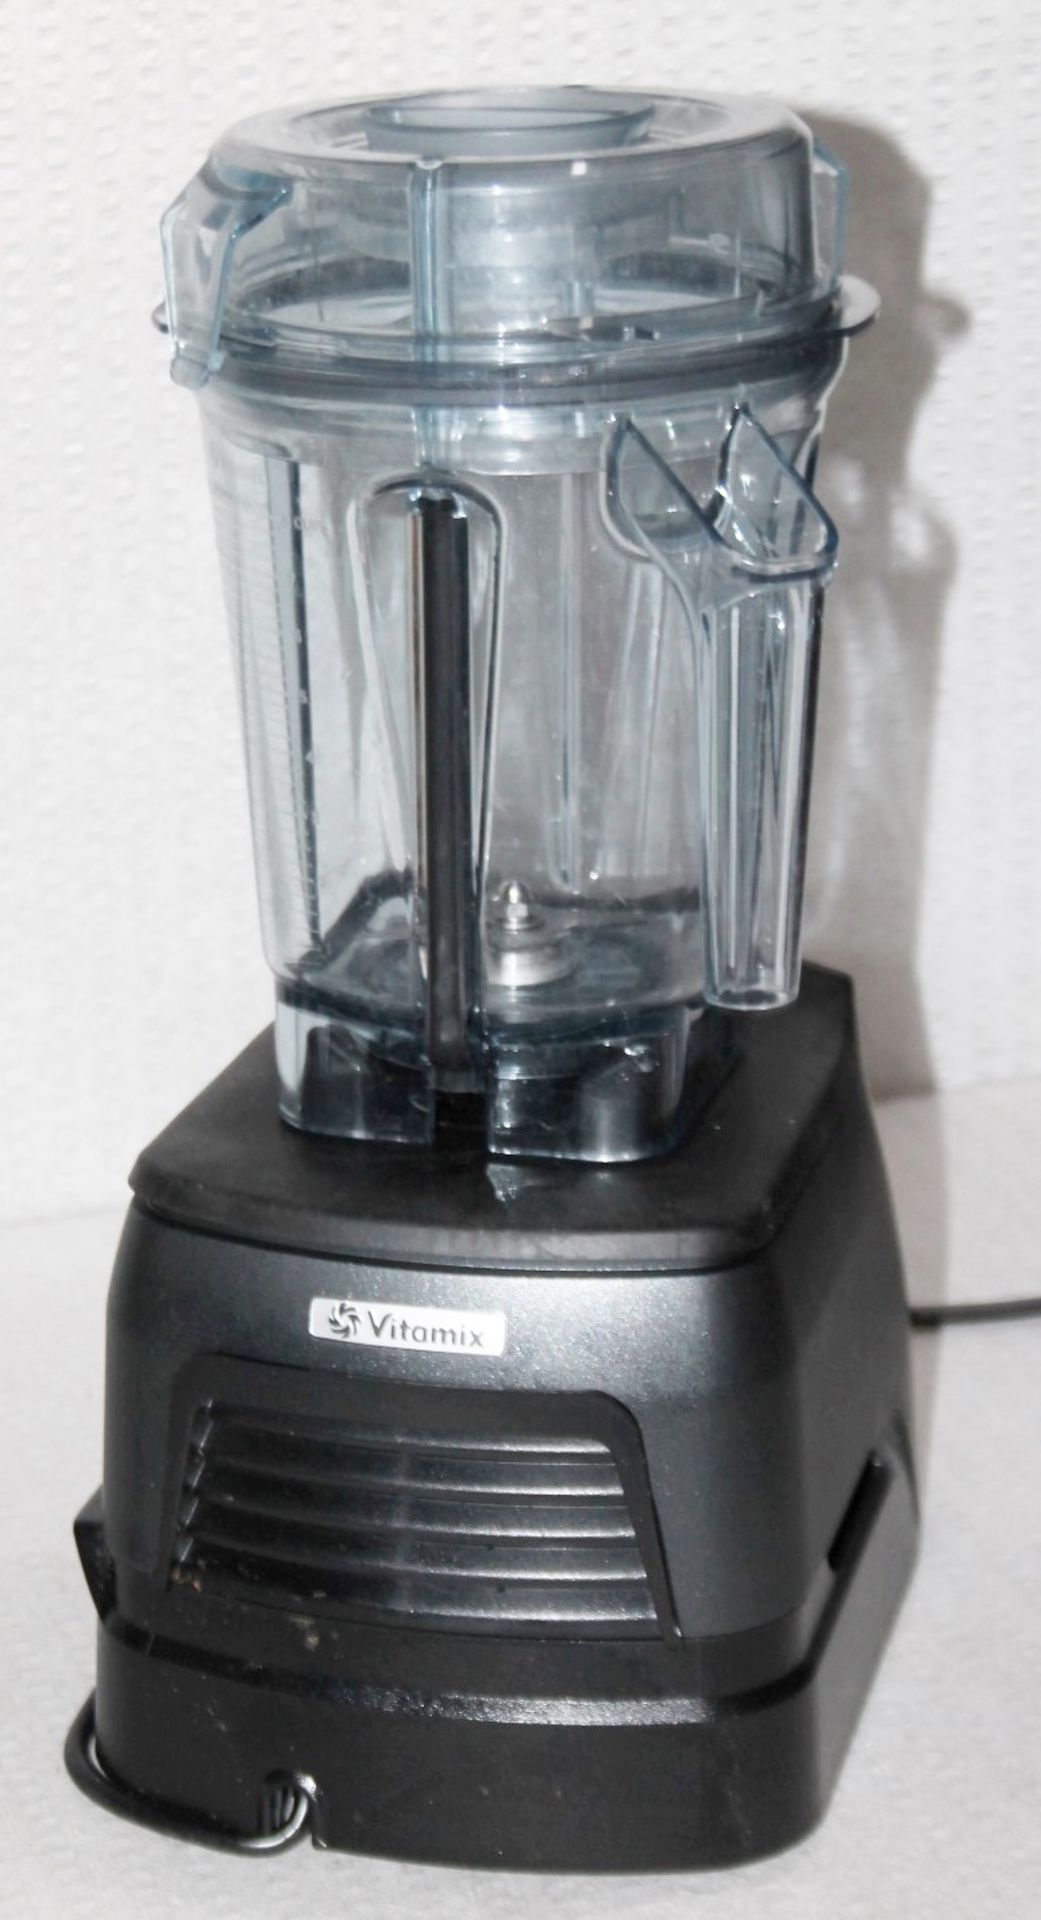 1 x VITAMIX Ascent A3500 Blender Anniversary Bundle With Accessories - Original Price £799.00 - Ref: - Image 4 of 7